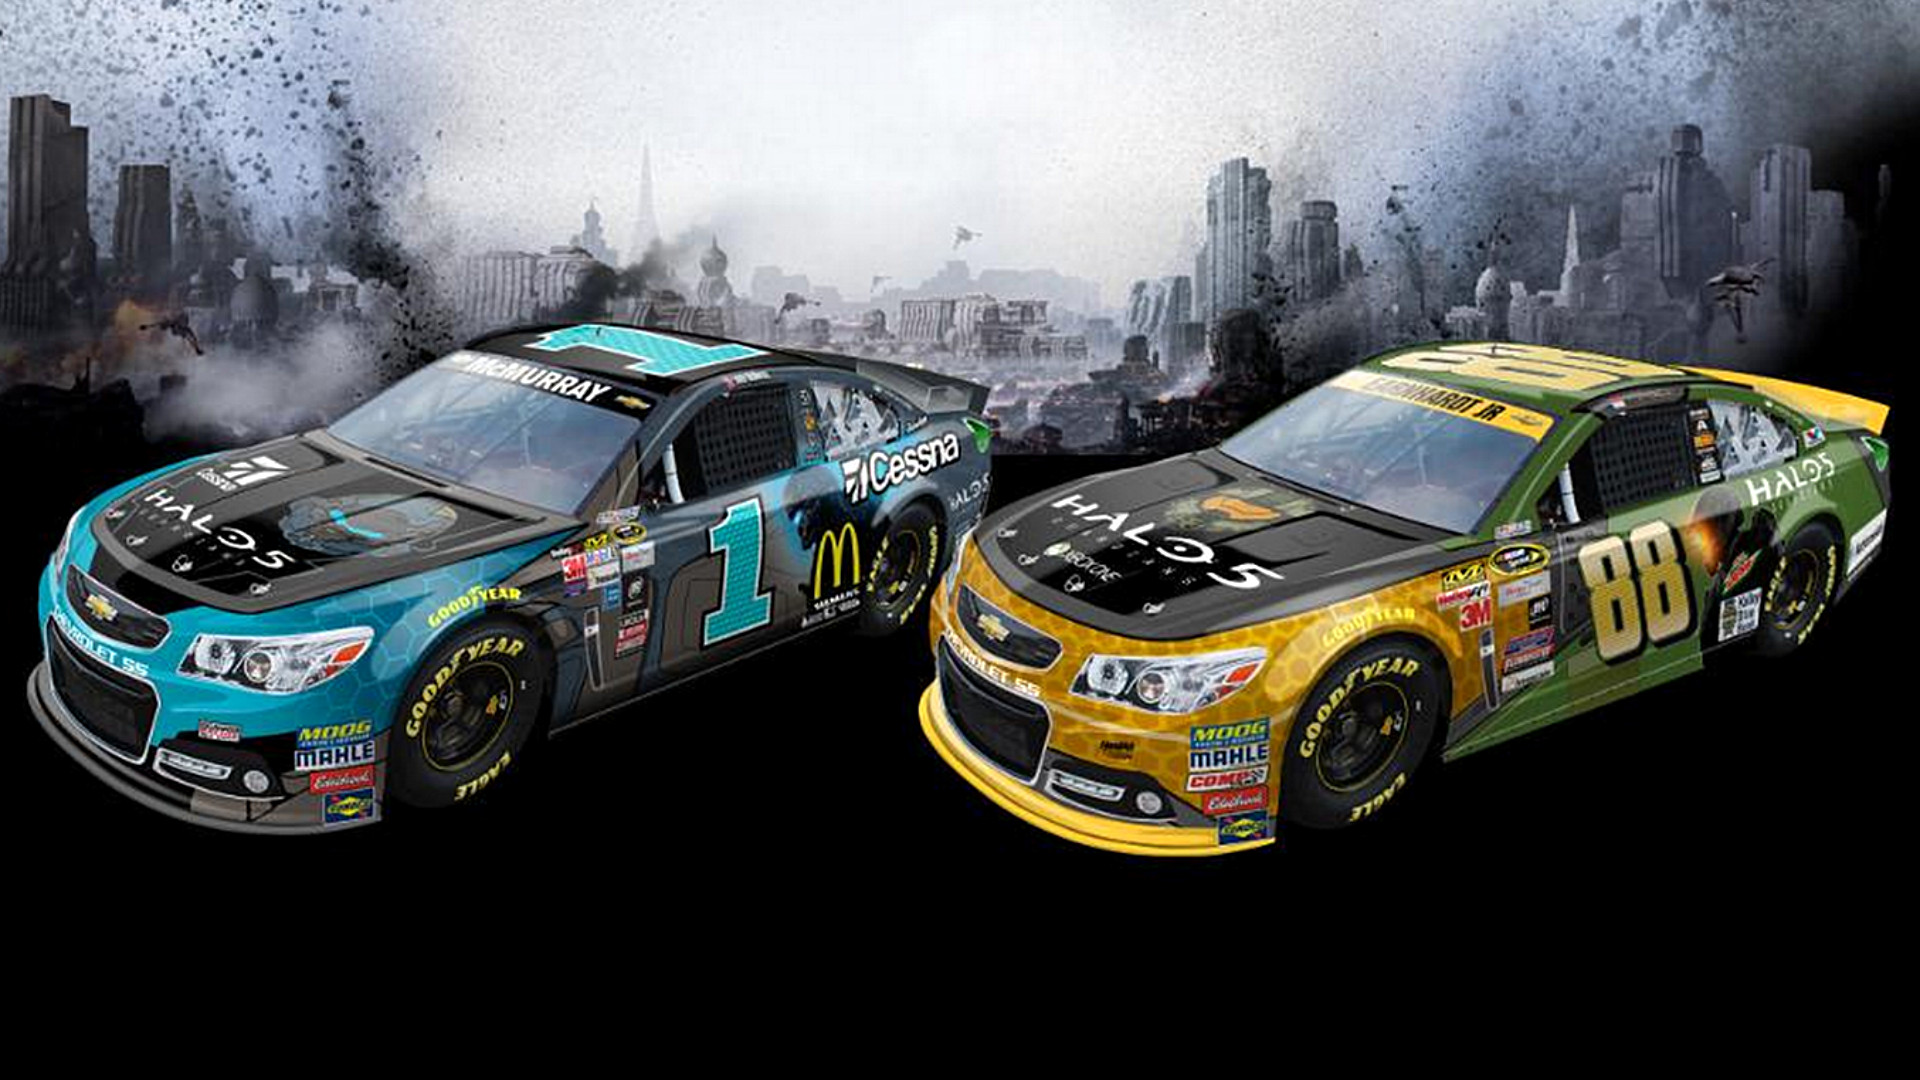 Dale Earnhardt Jr., Jamie McMurray cars to have Halo schemes NASCAR Sporting News